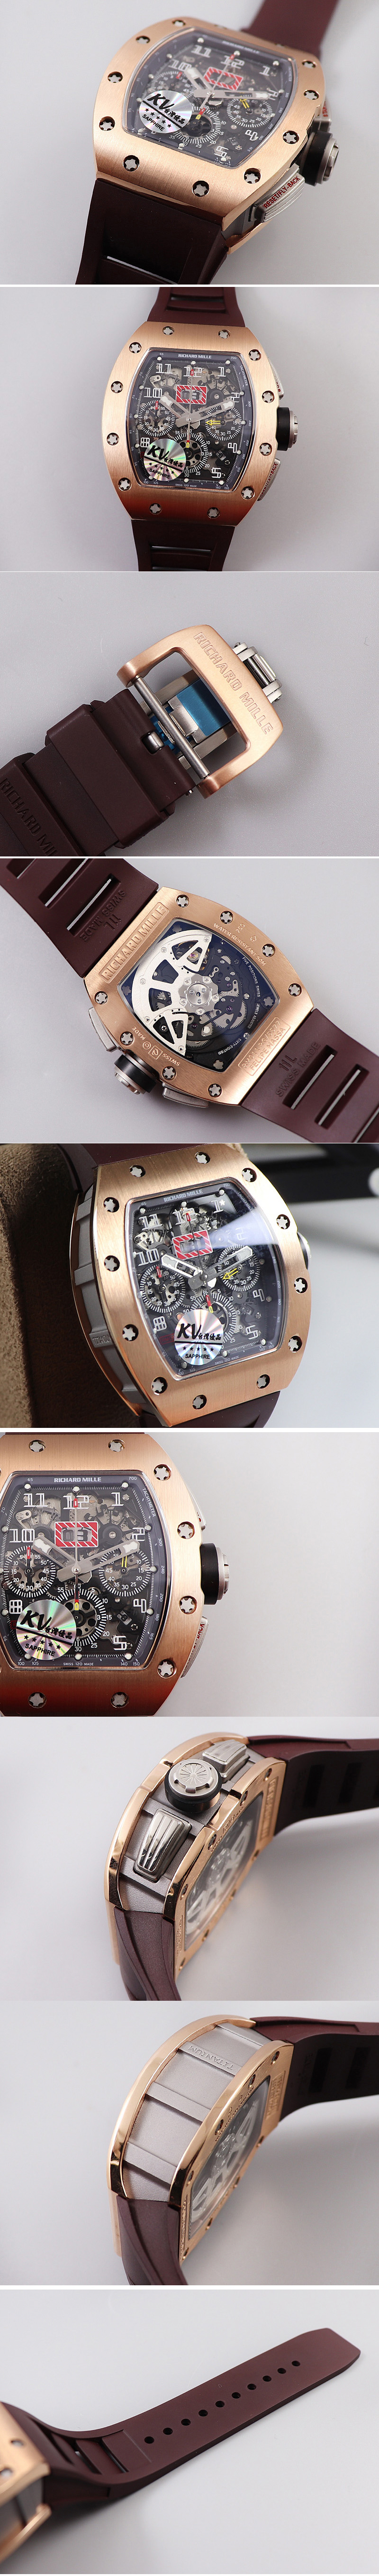 Replica Richard Mille RM011 RG Chrono KVF 1:1 Best Edition Crystal Dial Black on Brown Rubber Strap A7750